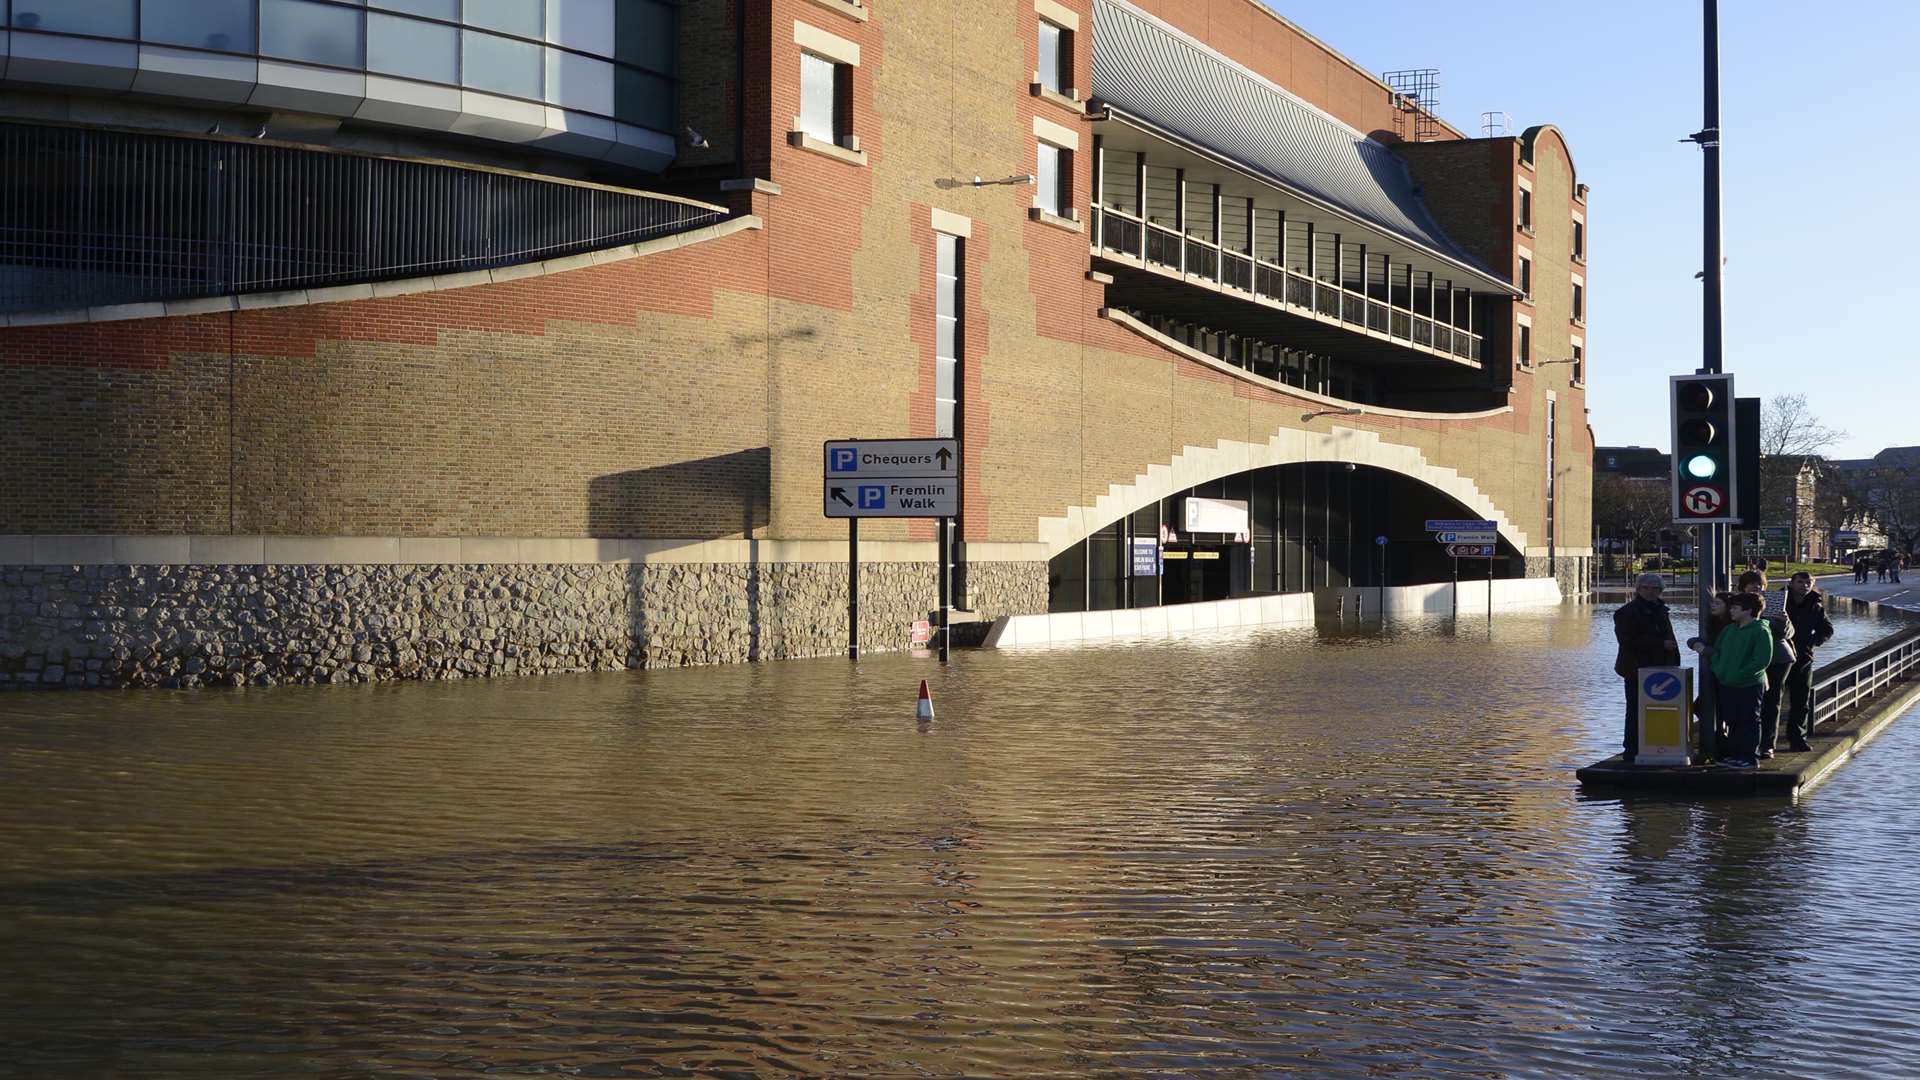 One of Maidstone's busiest roads lies under the water